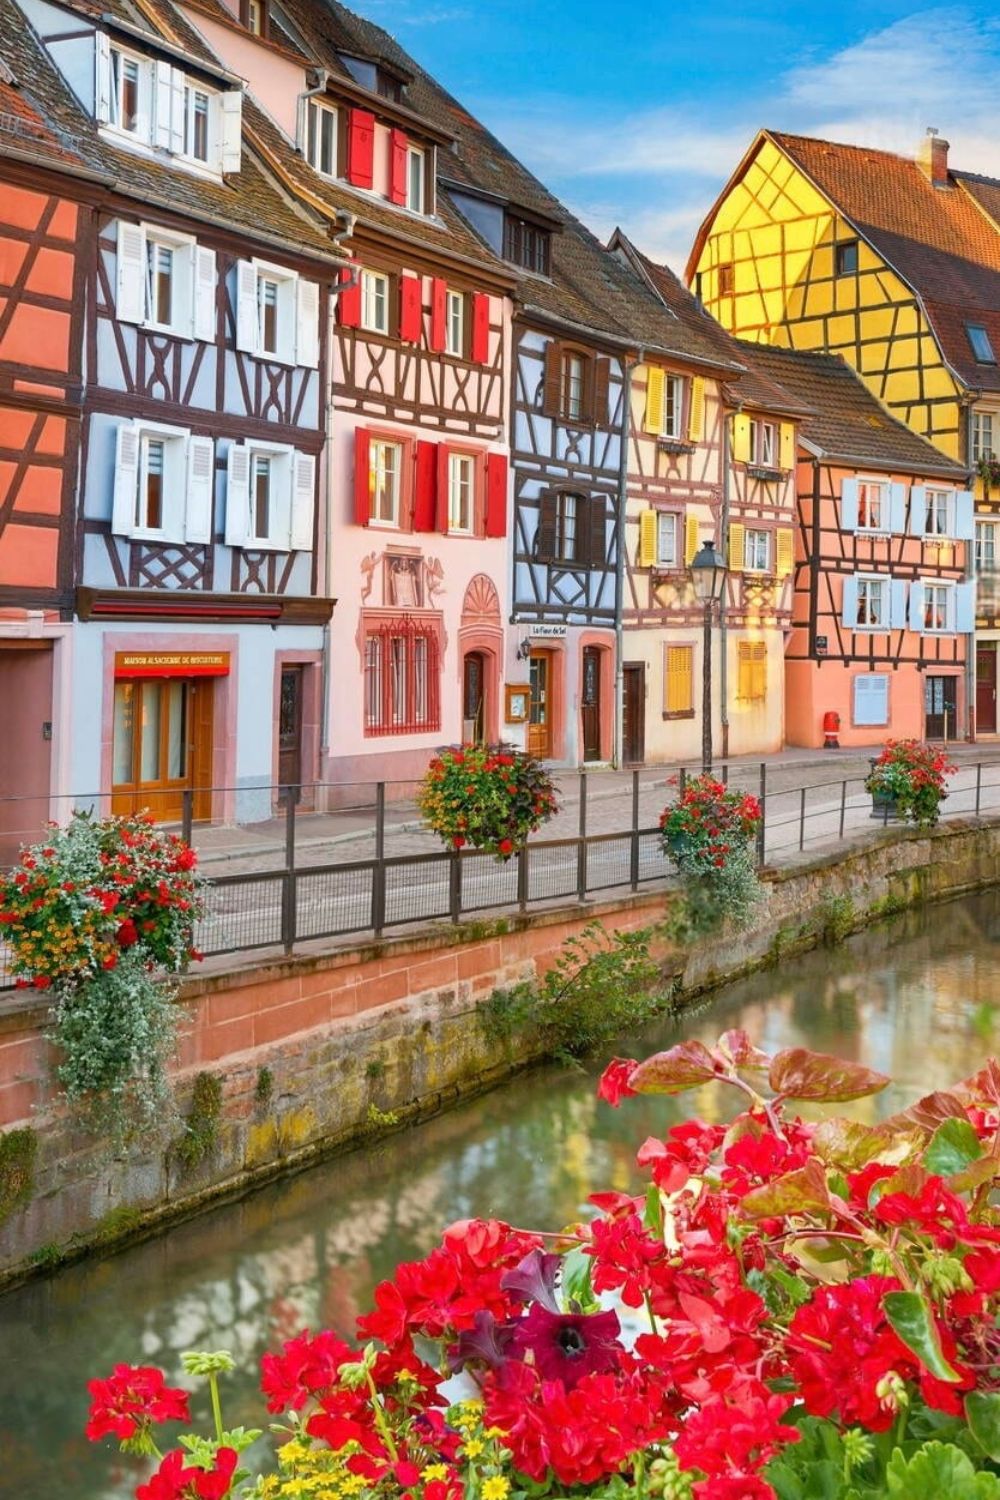 The ULTIMATE One Day in Colmar, France Itinerary